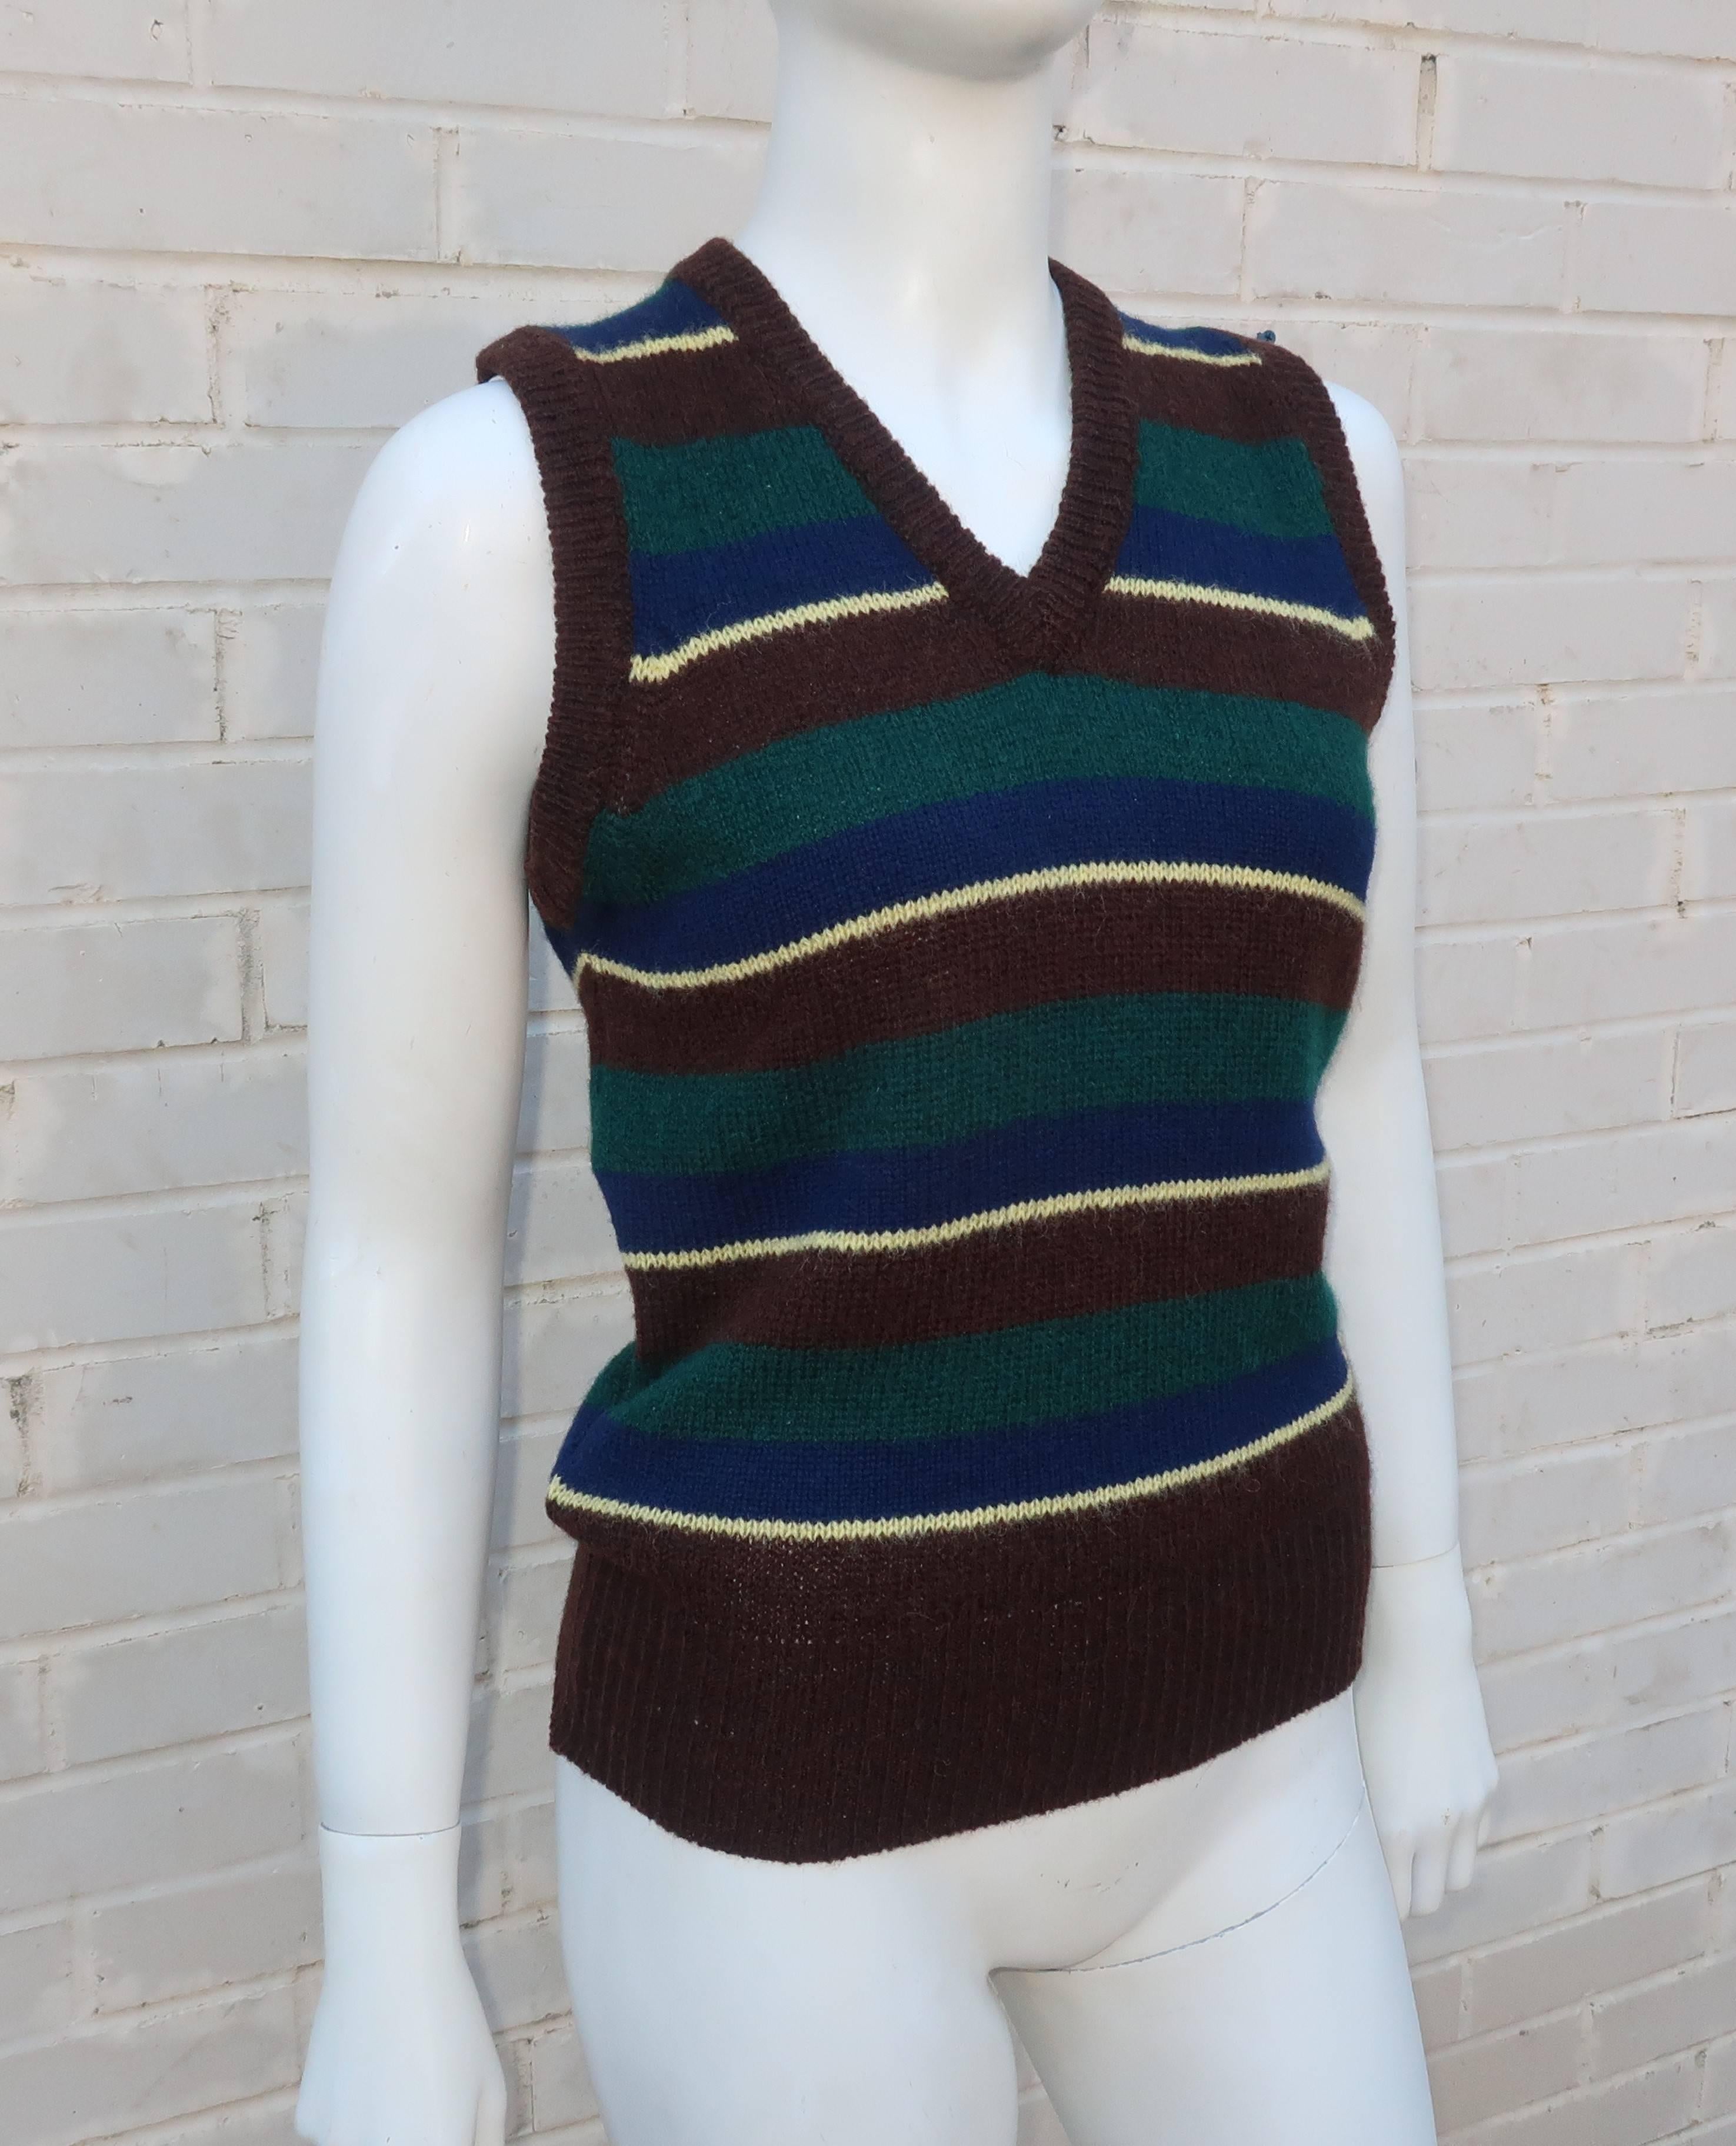 Add a preppy finishing touch to your ensemble with this 1970's Ralph Lauren sweater vest. Vests are a great way to add a menswear influence to your look and offer the practical benefit of a little warmth. The classic striped pattern is a navy blue,